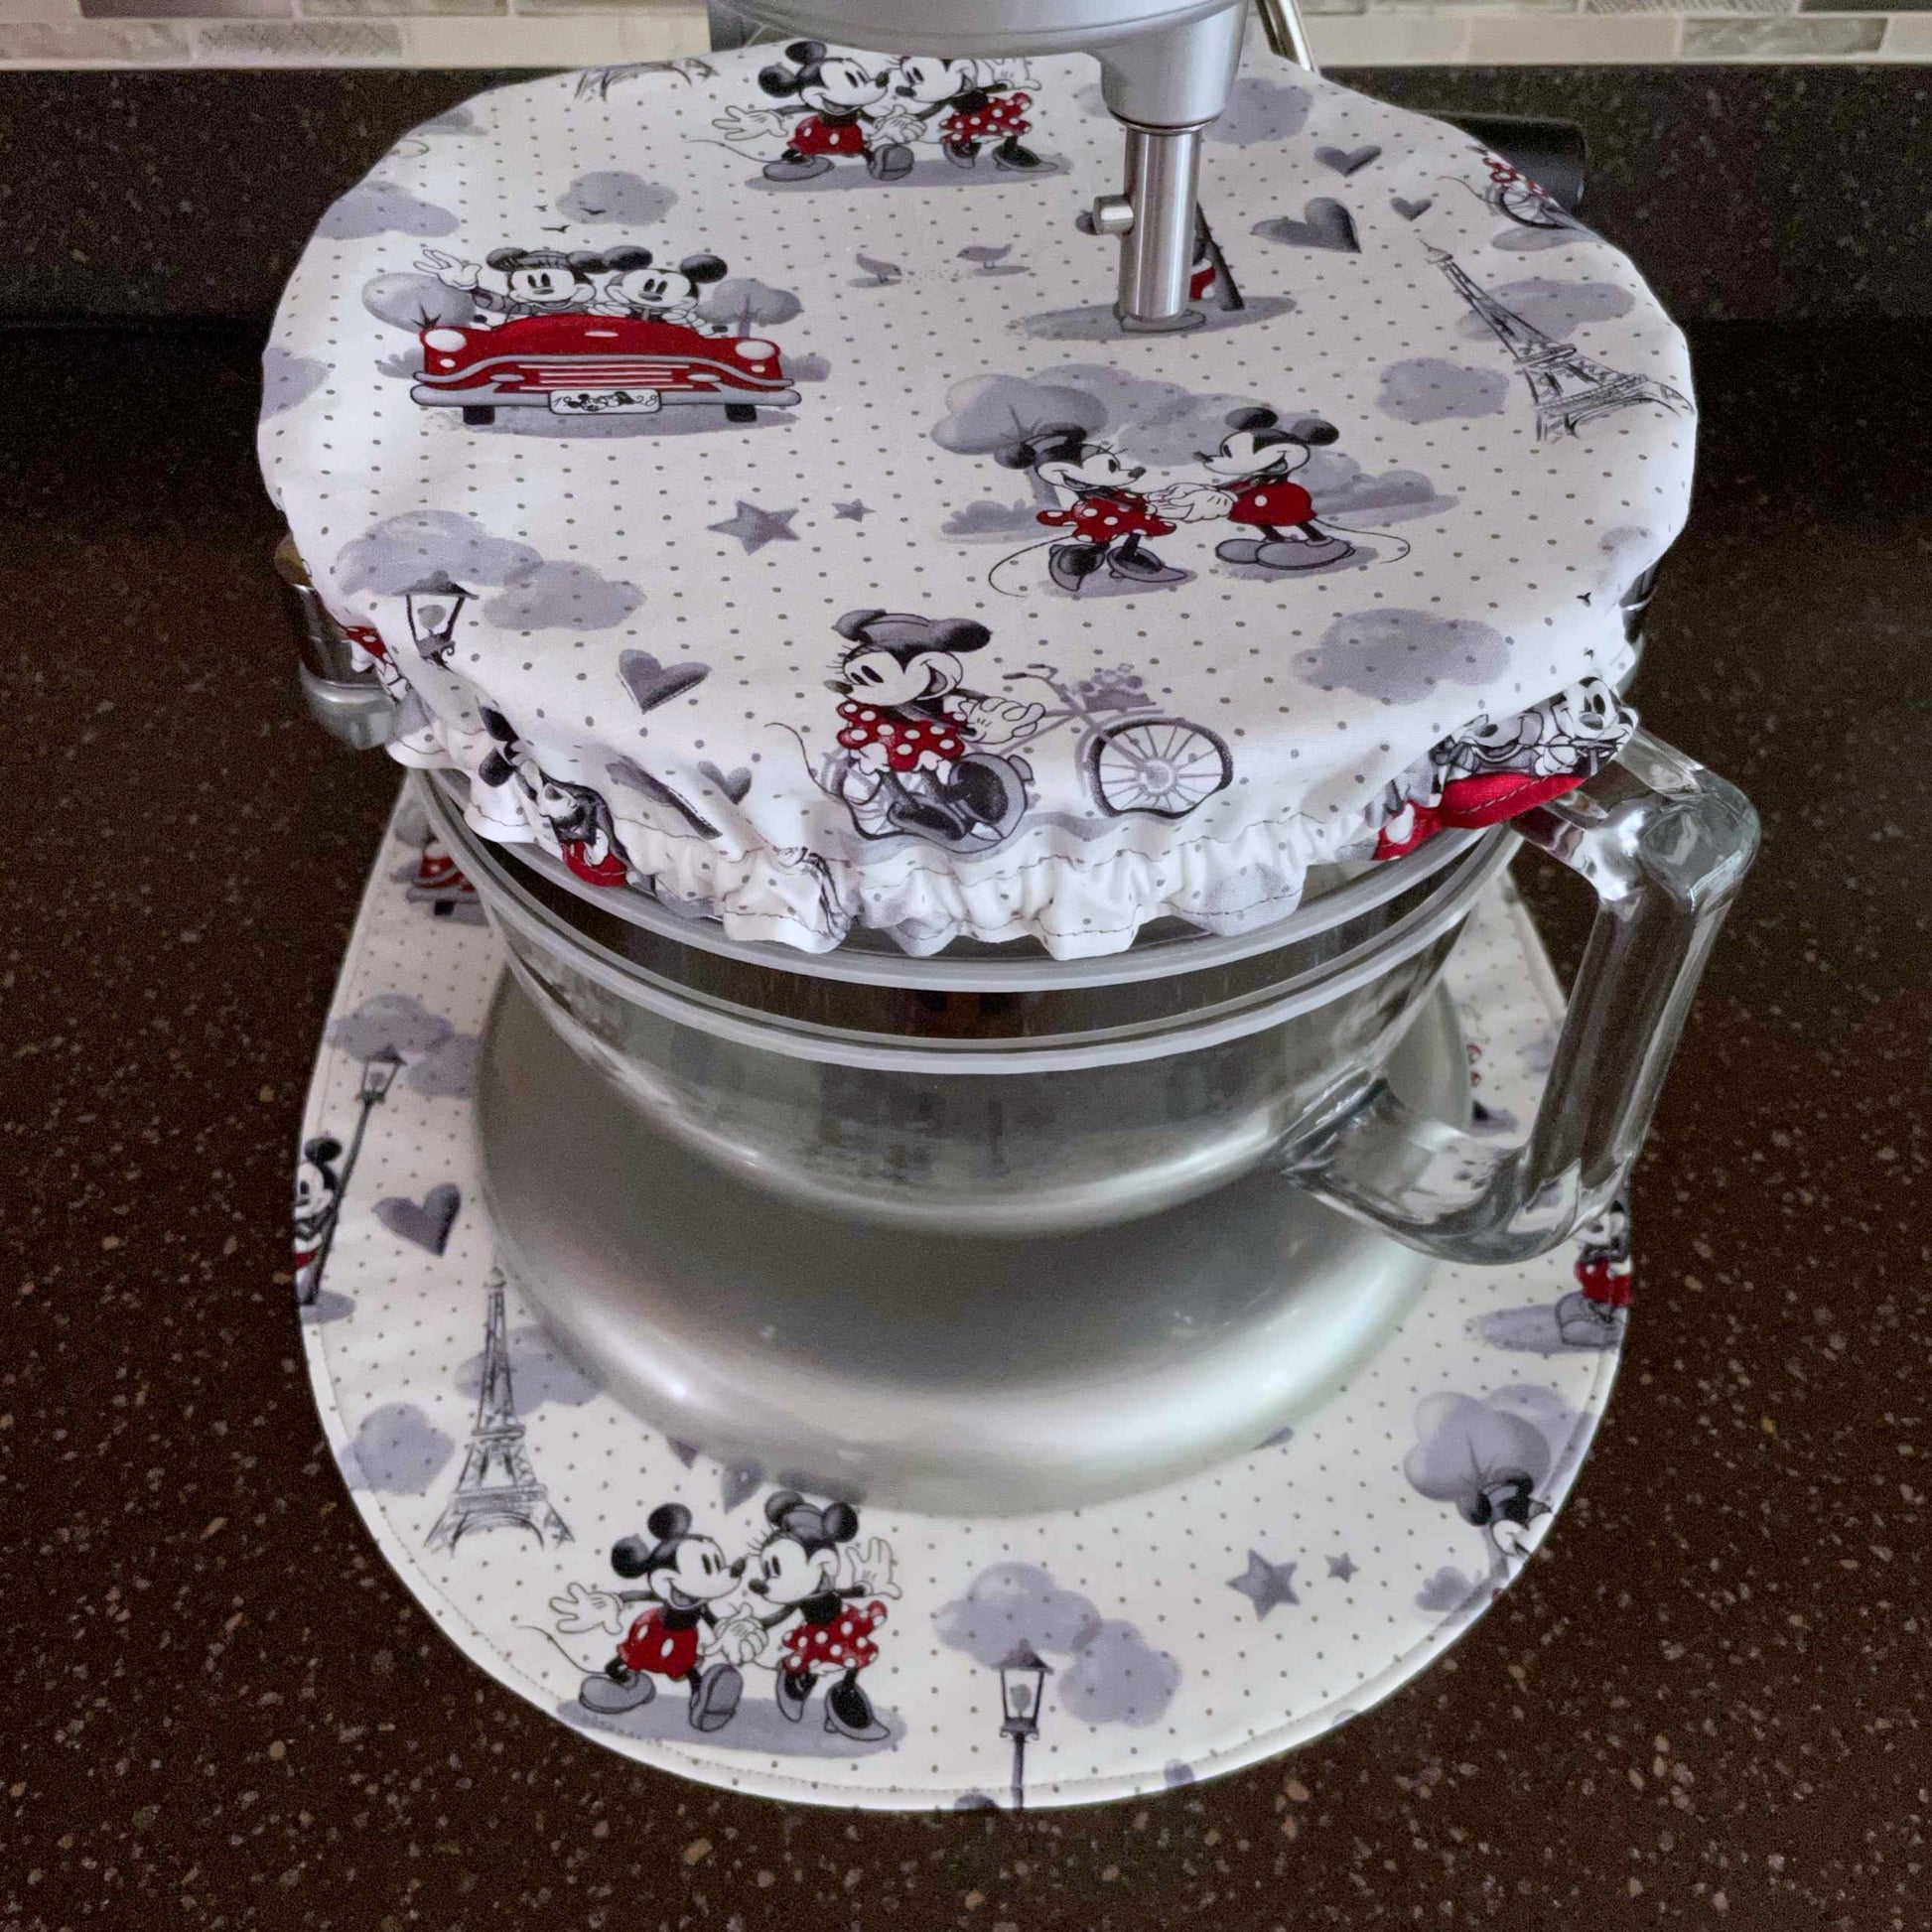 Mickey and Minnie bowl Cover and Stand Mixer Slider Mat